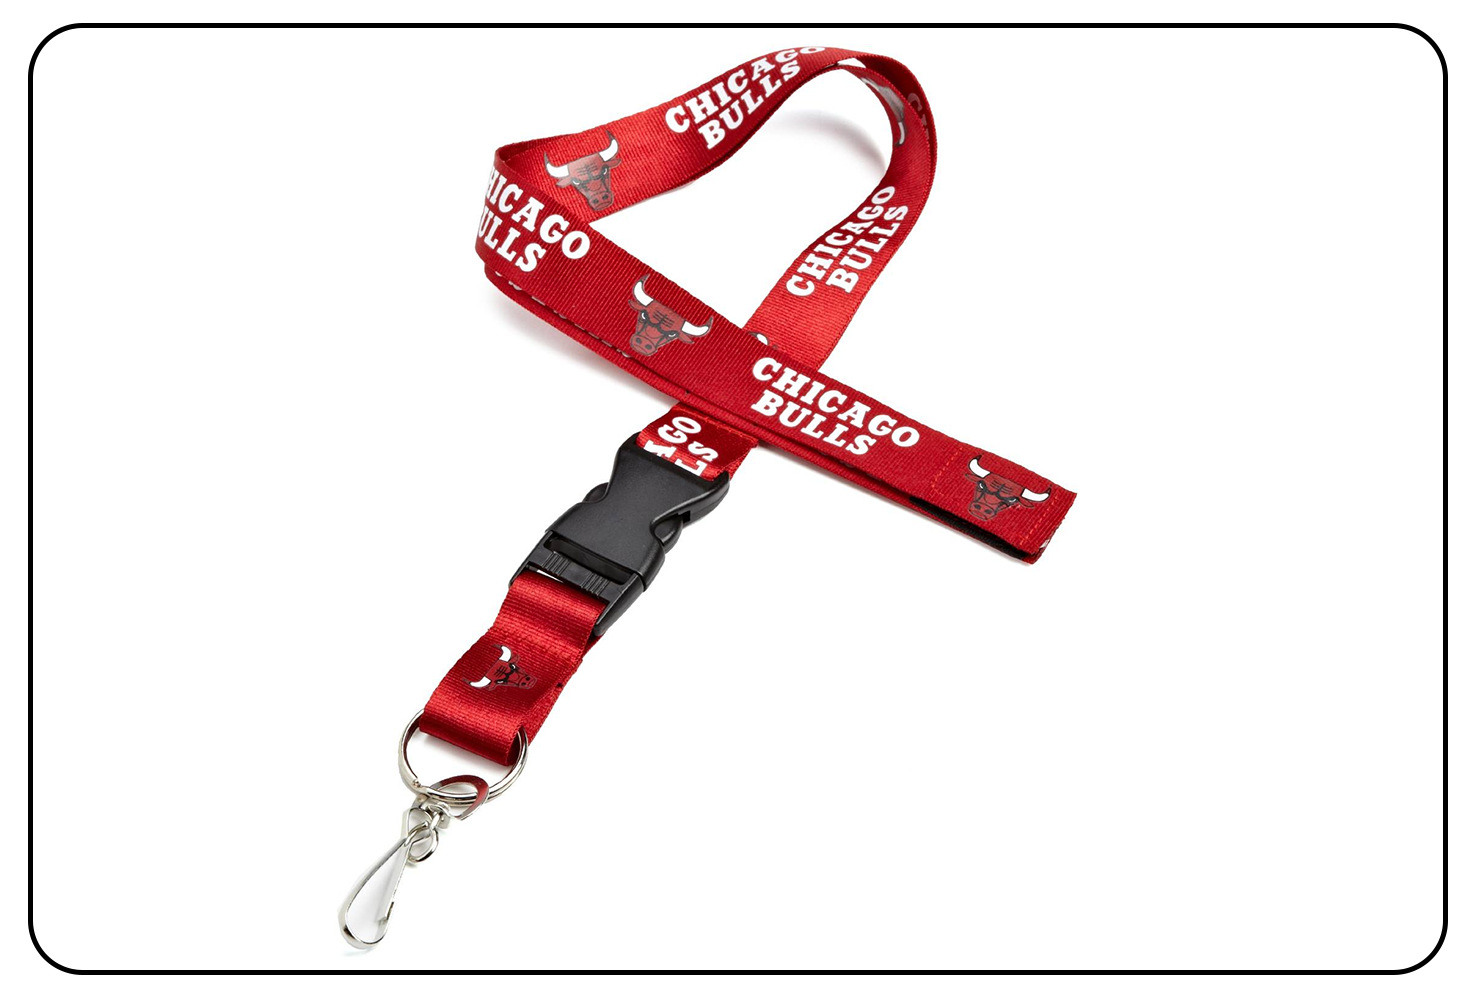 Personalized lanyard printing for branded identification.